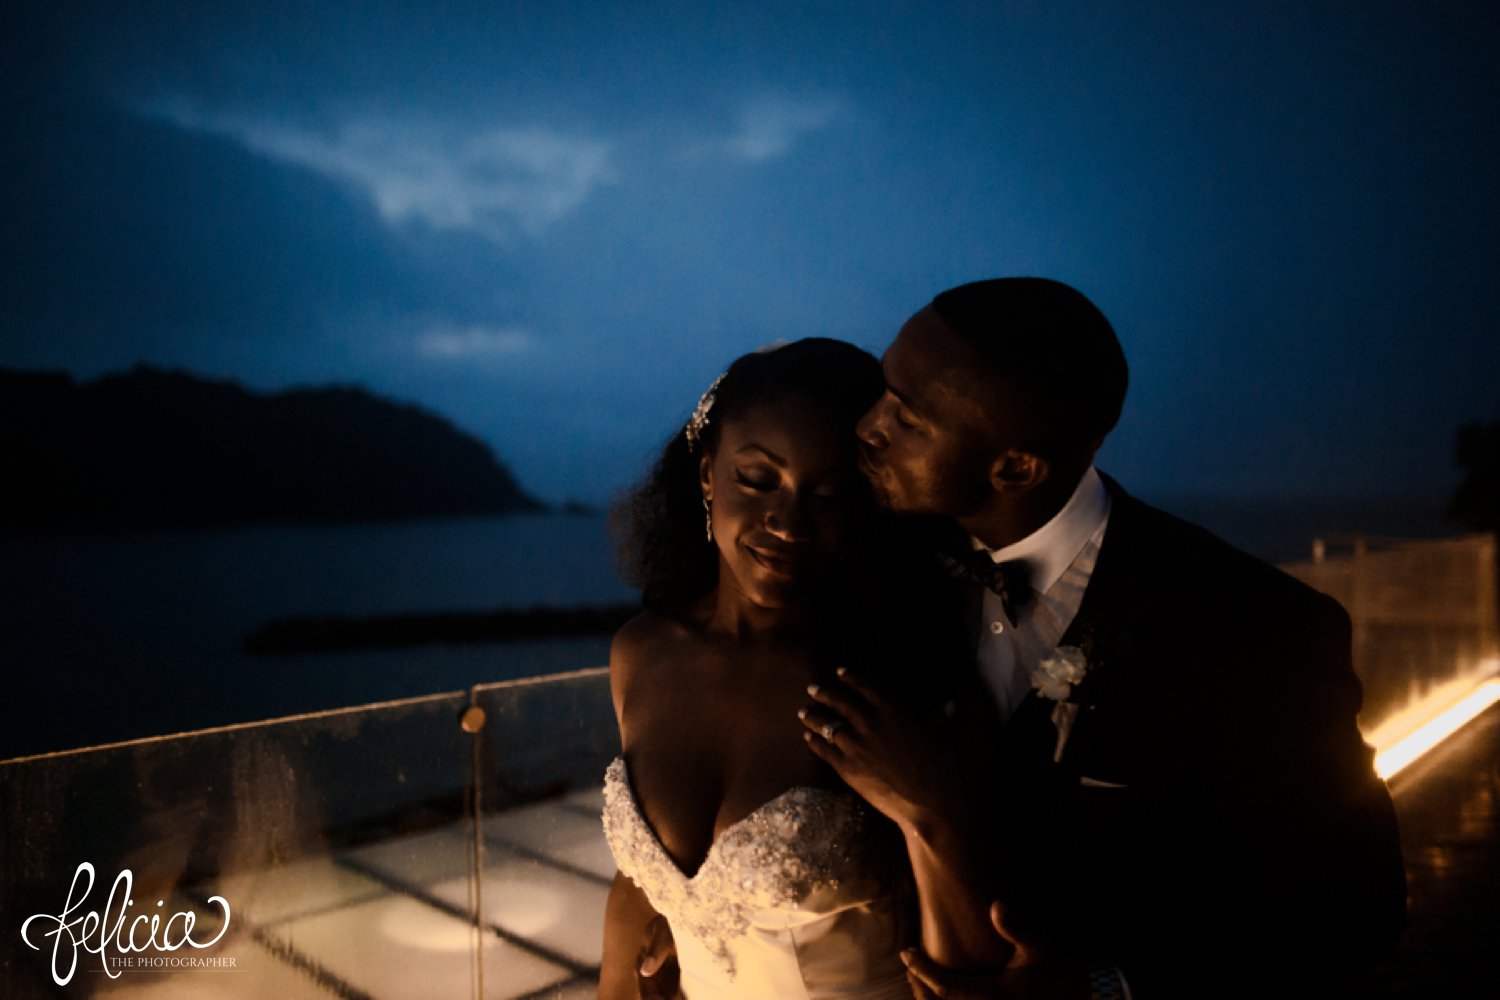   images by feliciathephotographer.com | destination wedding photographer | st lucia | l&s travel | the Royalton | couple portraits | bride and groom | night on the beach | thunder storm | fire lighting | romantic | white gown | kleinfeld | navy suit | 